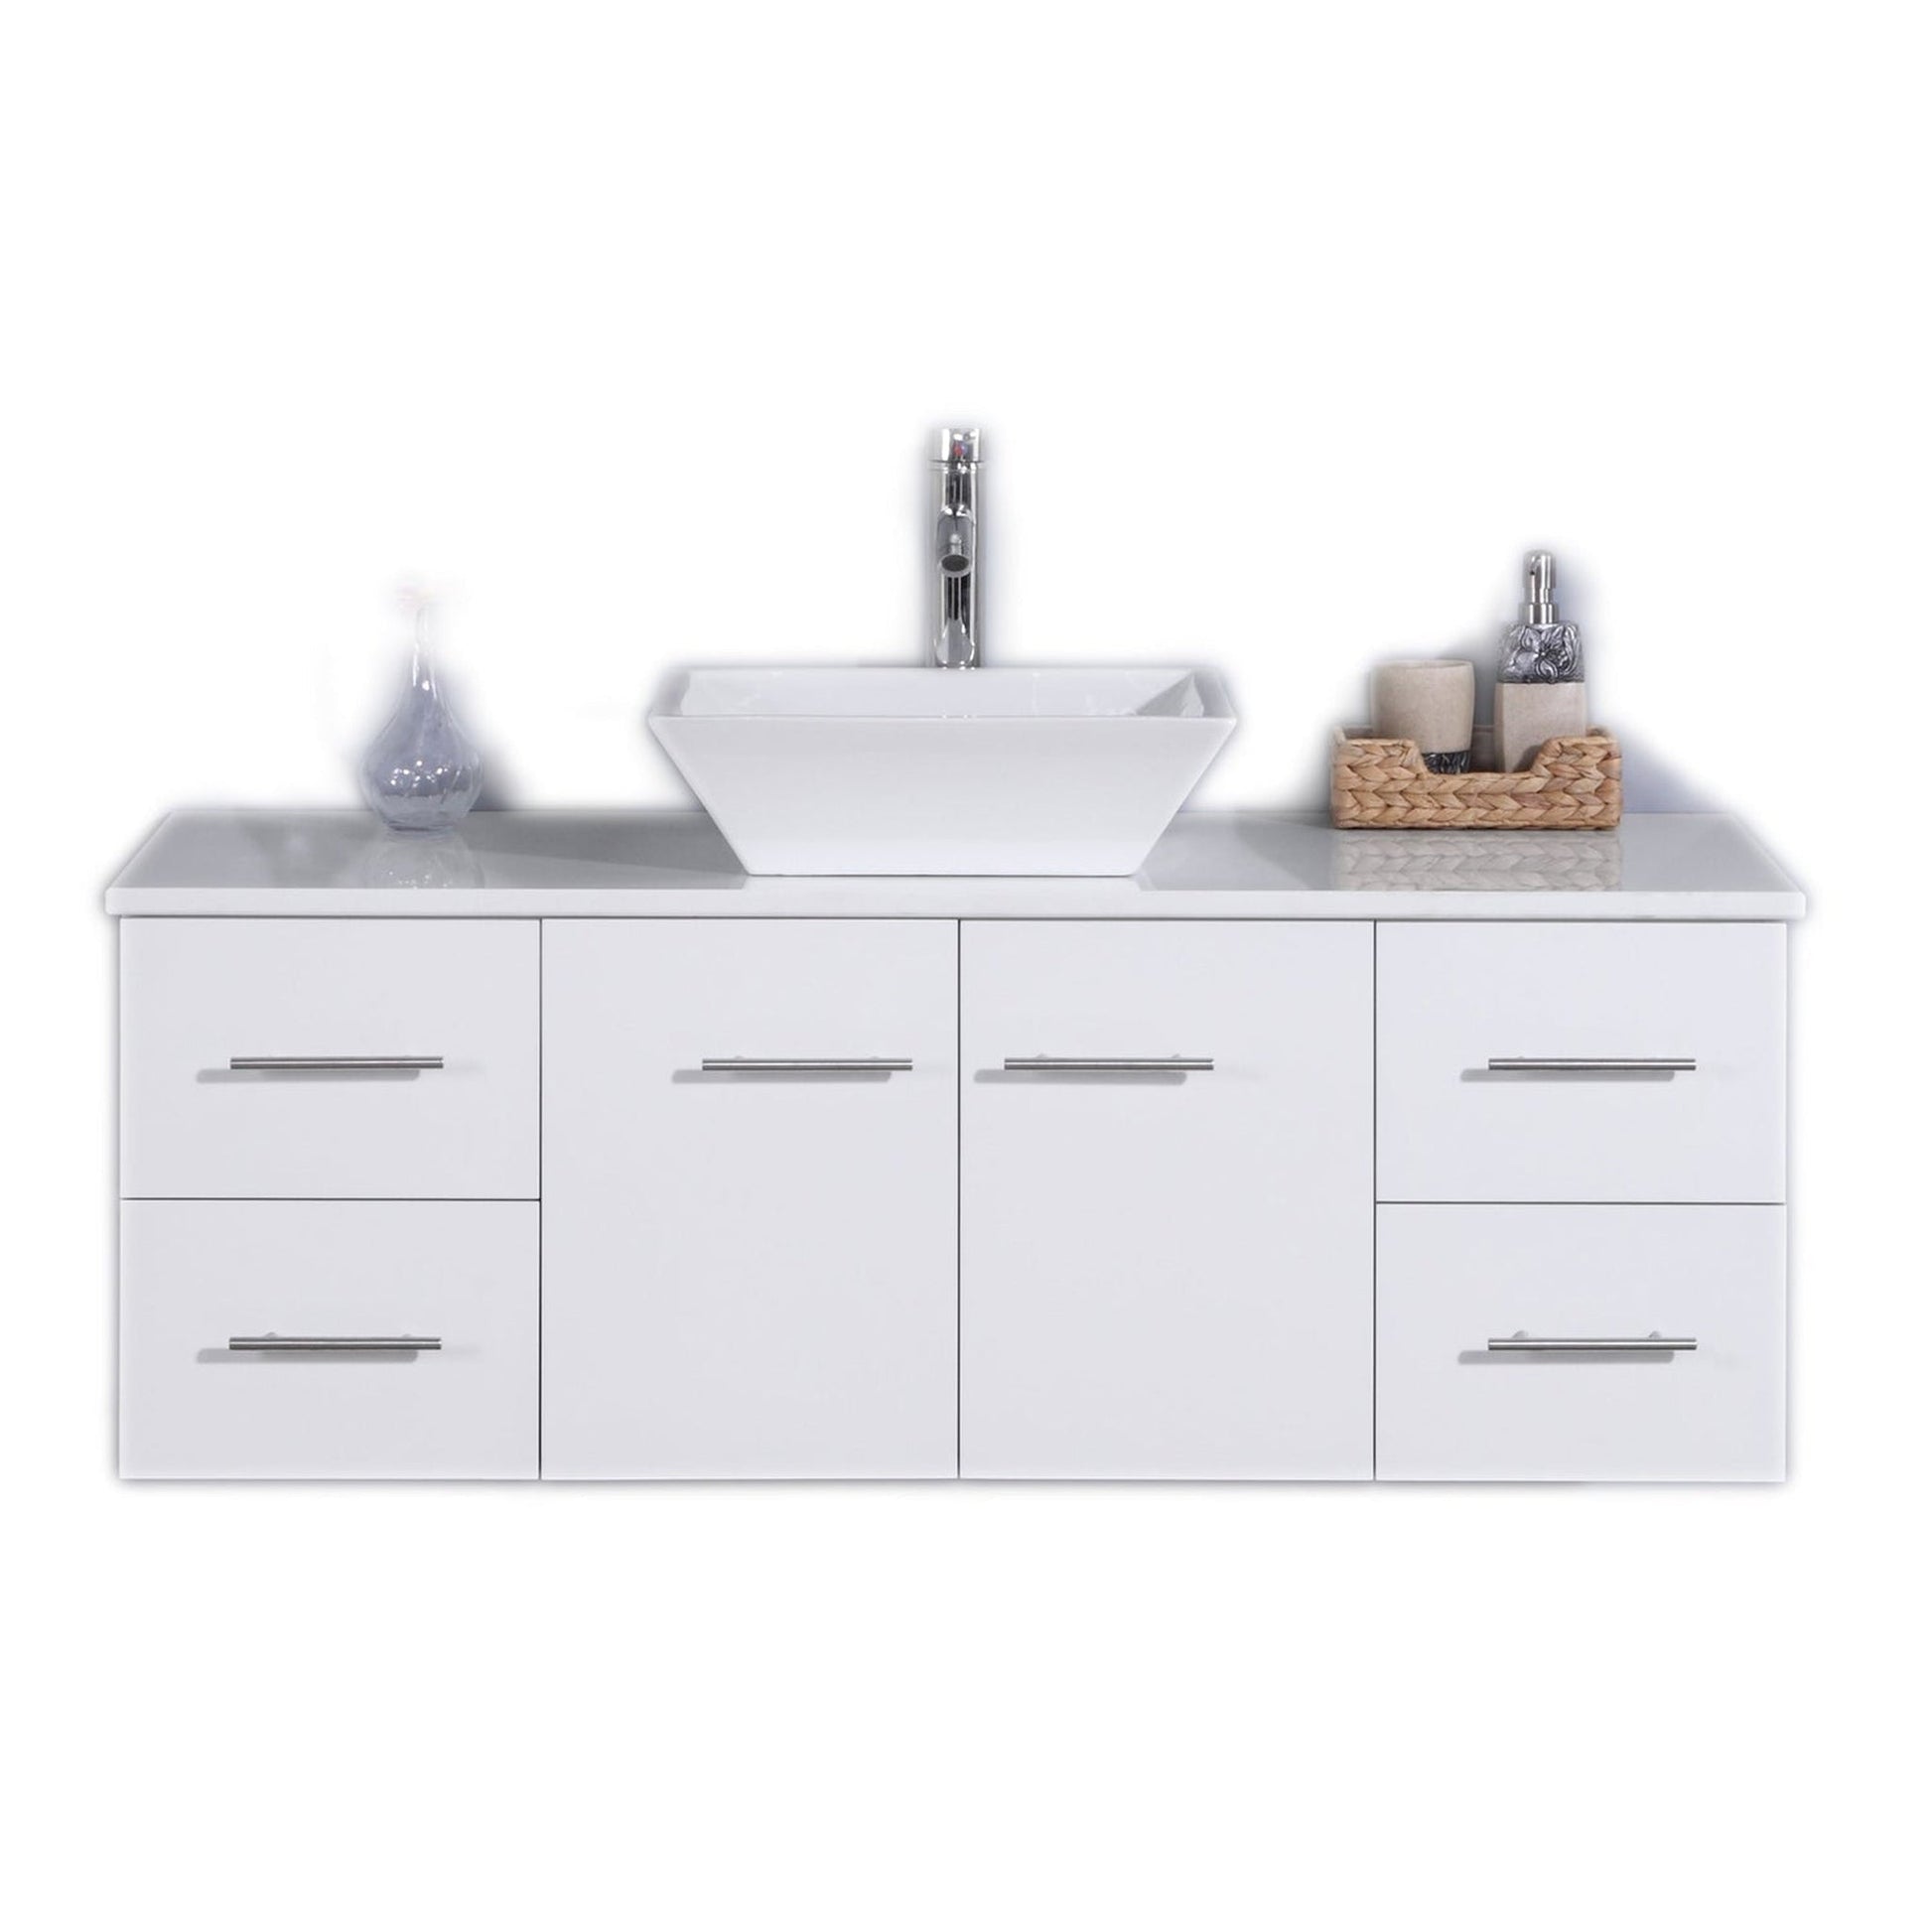 Get Bathroom Cabinet Drawer Installation By The Drawer Dude